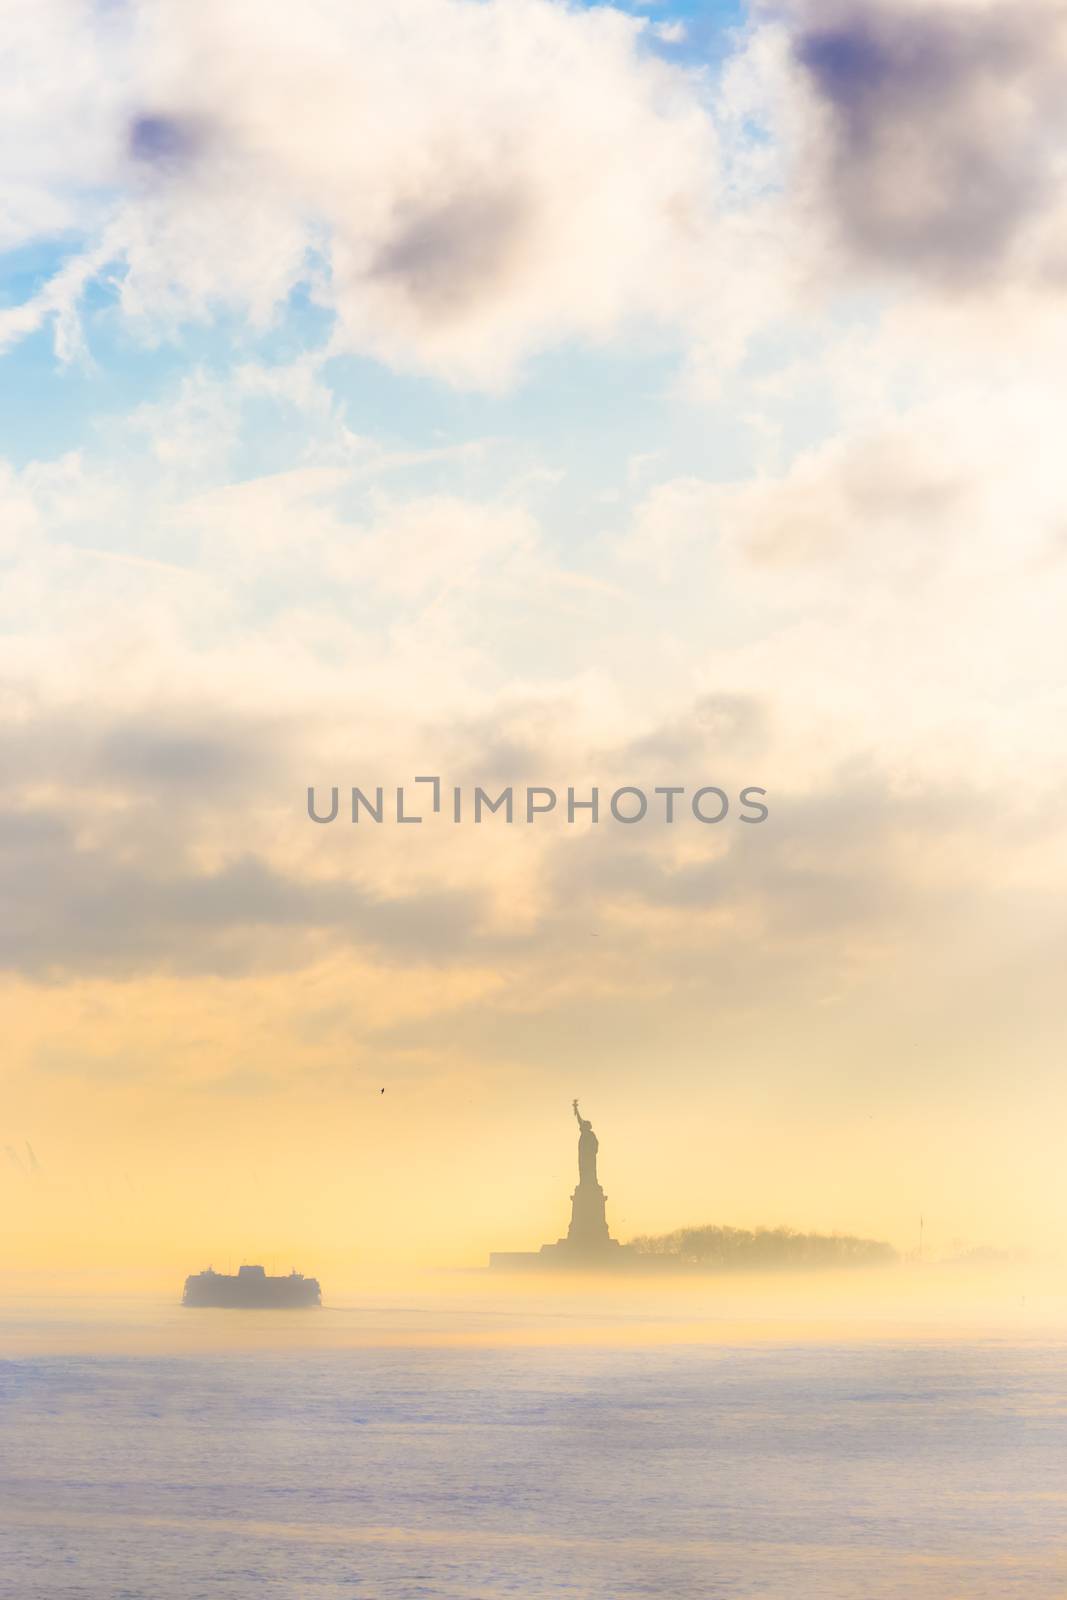 Staten Island Ferry cruises past the Statue of Liberty on a misty sunset. Manhattan, New York City, United States of America. Vertical composition. Copy space.